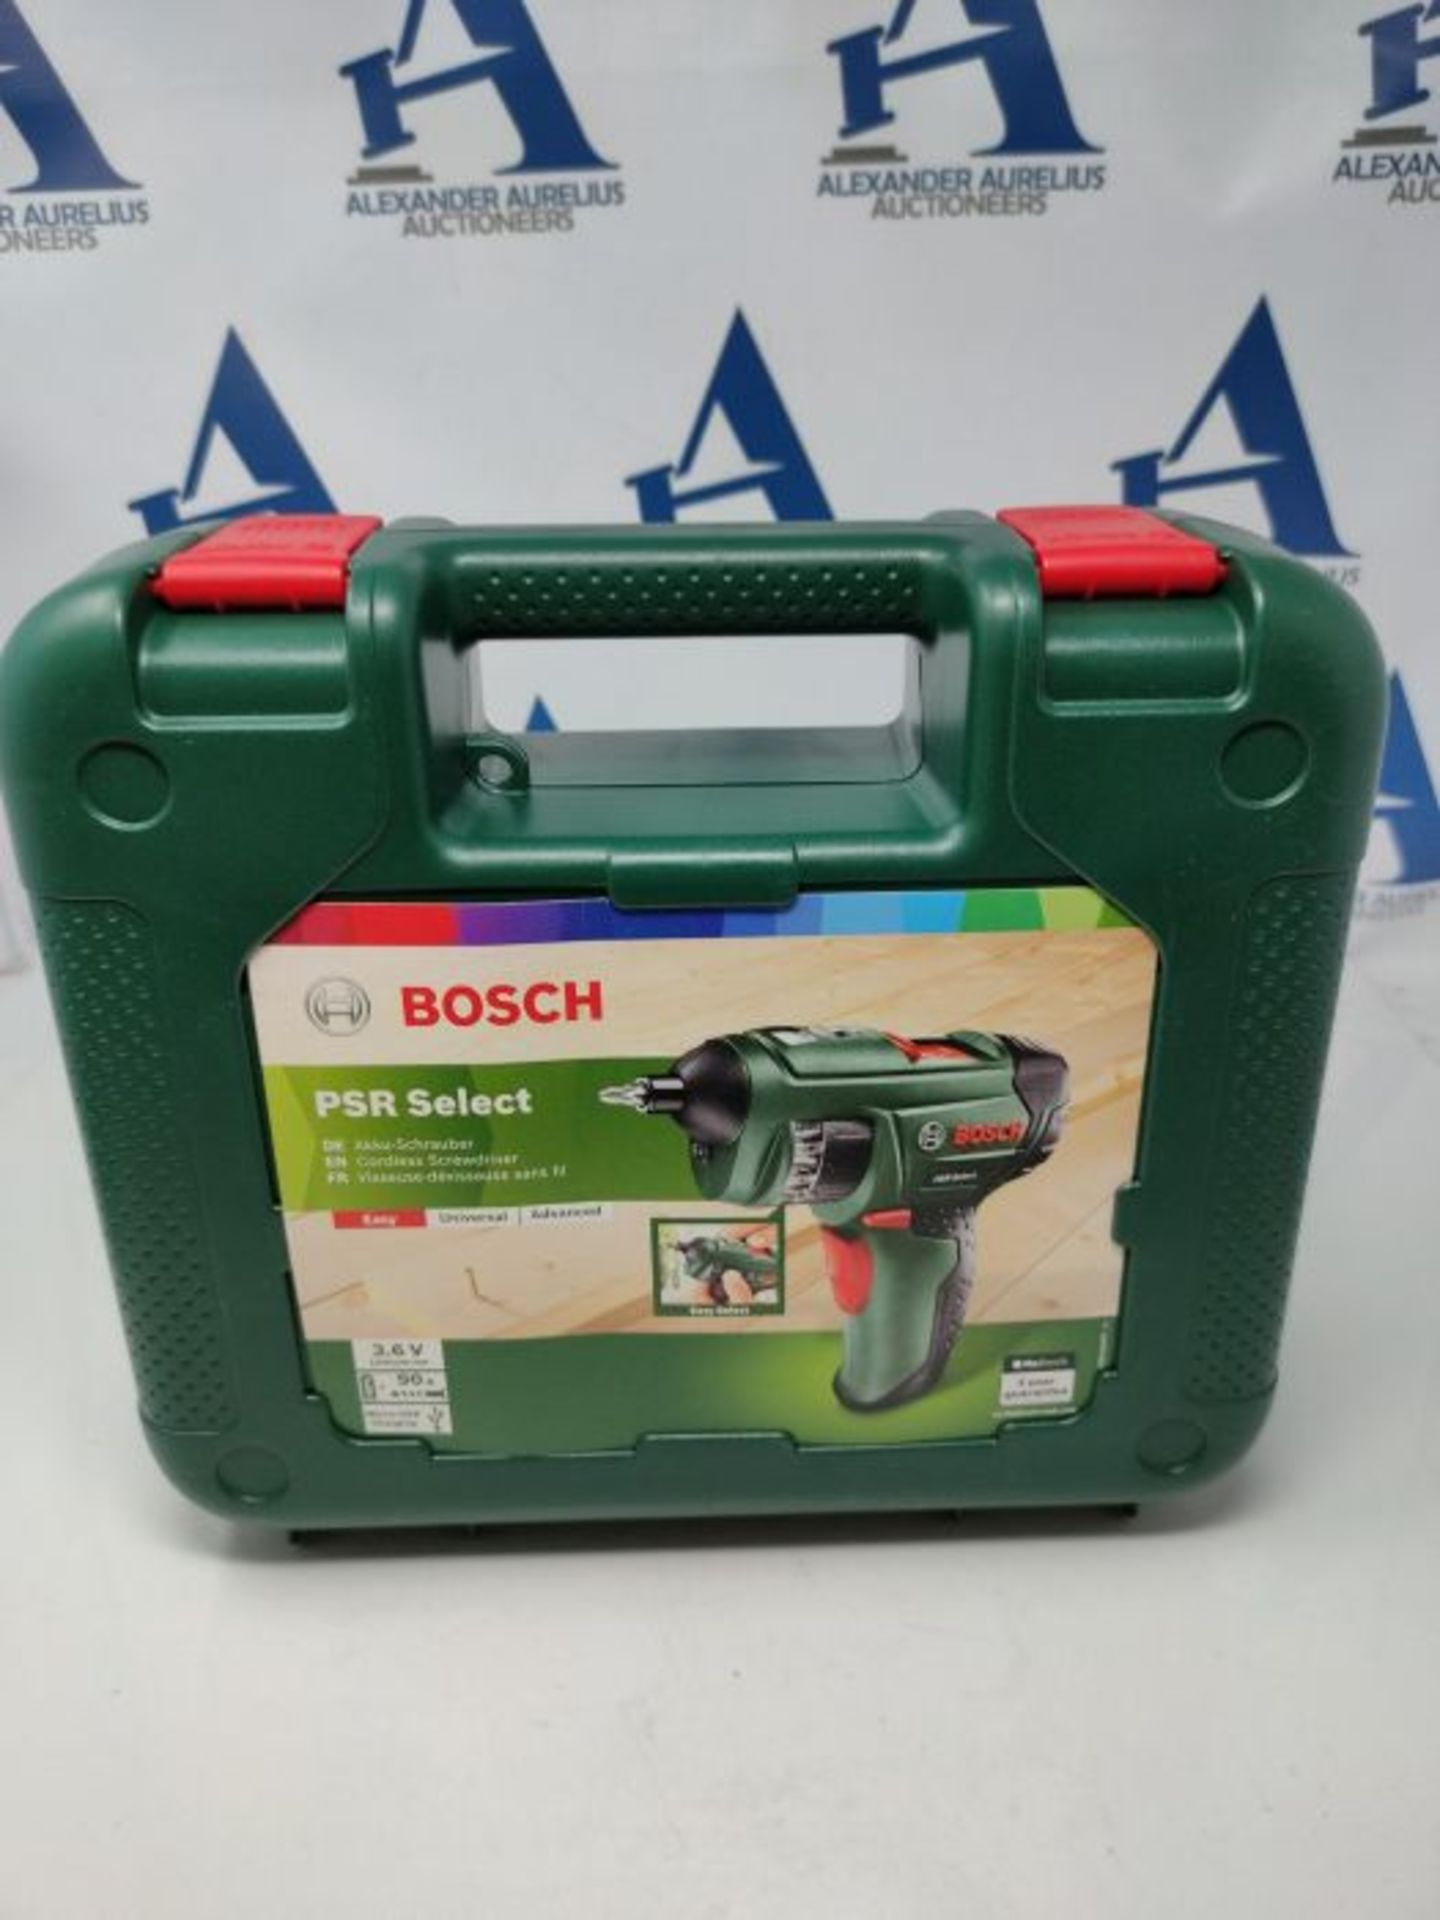 Bosch Home and Garden Cordless Screwdriver PSR Select (with Integrated 3.6 V Lithium-I - Image 2 of 3